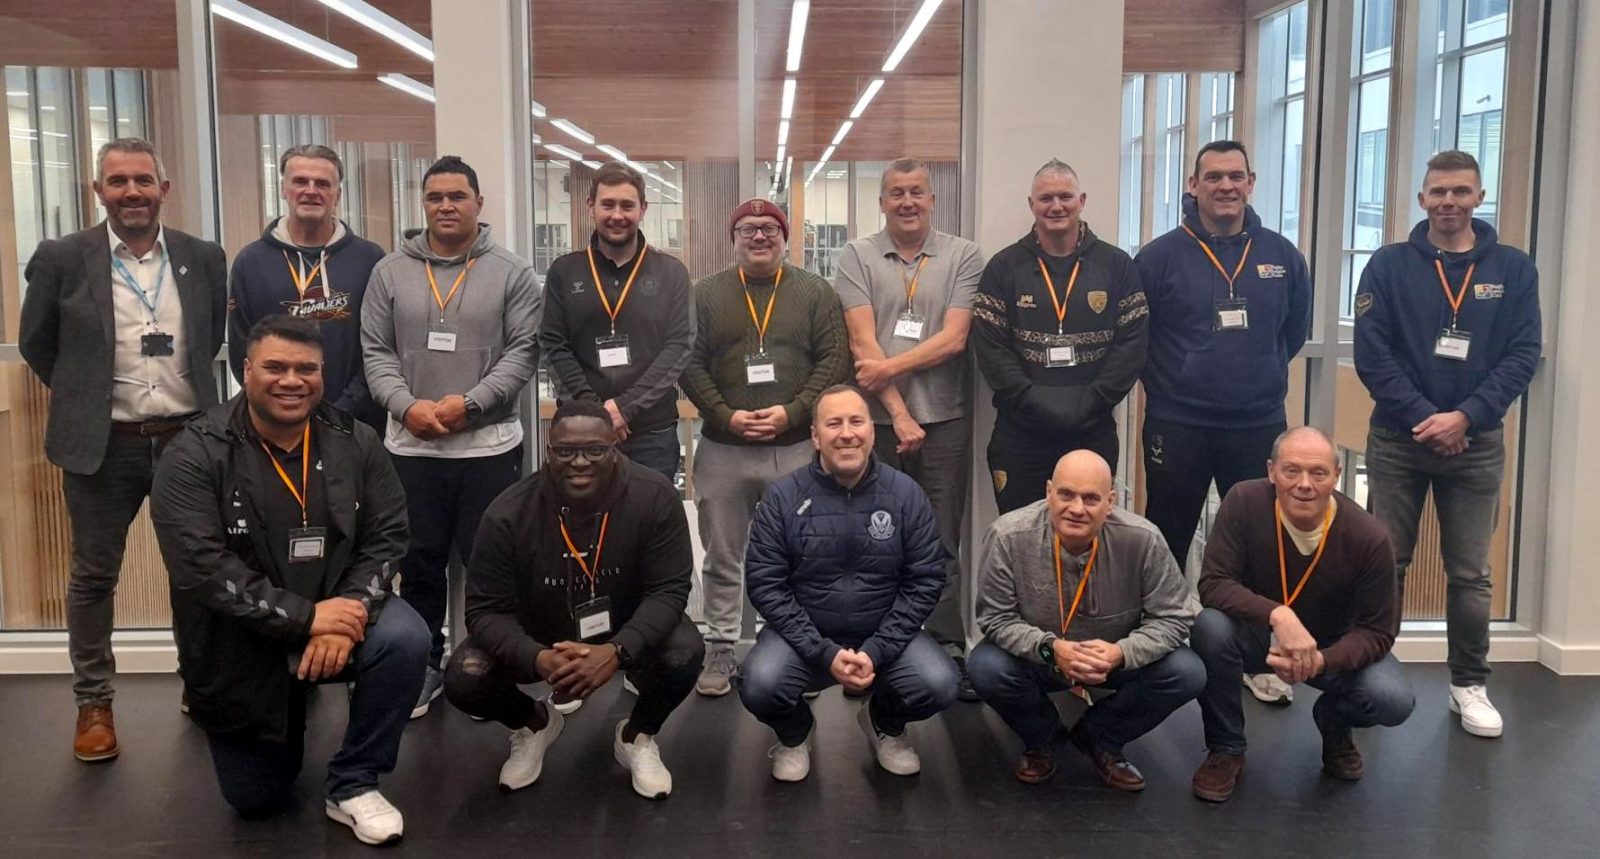 Players the focus as welfare managers complete CPD event